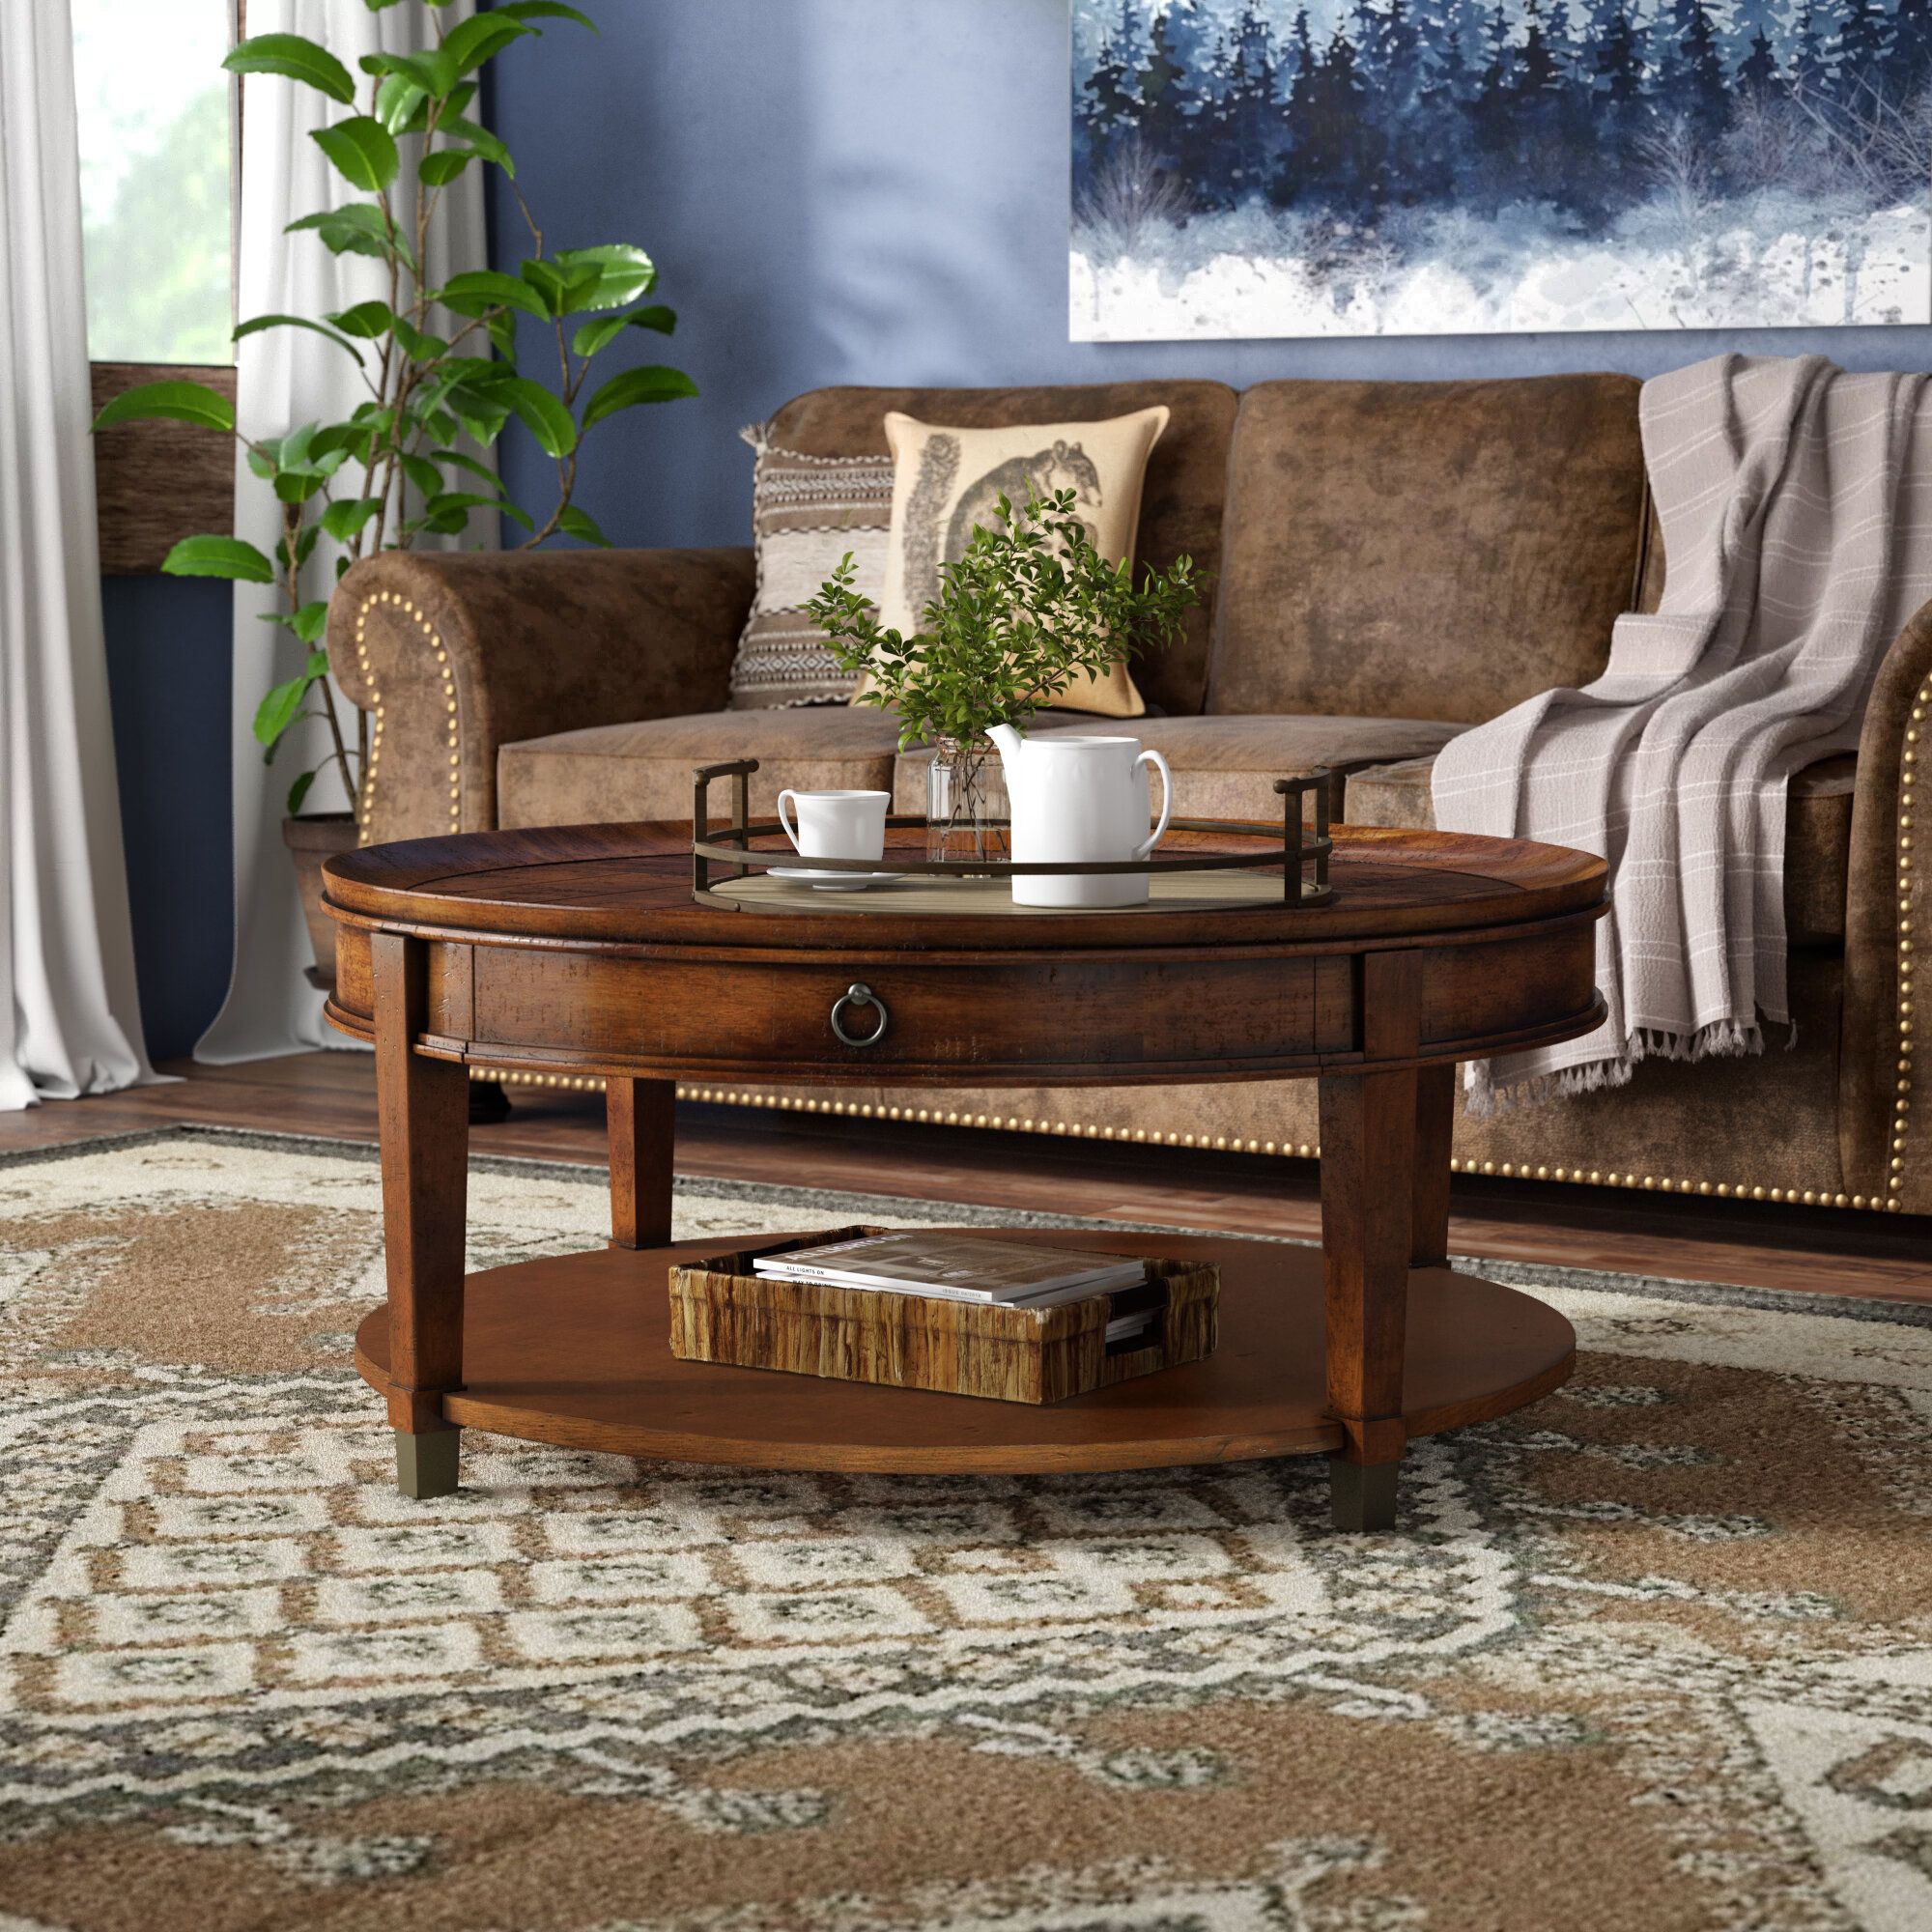 Foundstone™ Shelby 4 Legs Coffee Table With Storage & Reviews | Wayfair Intended For Mahogany Coffee Tables (Gallery 20 of 20)